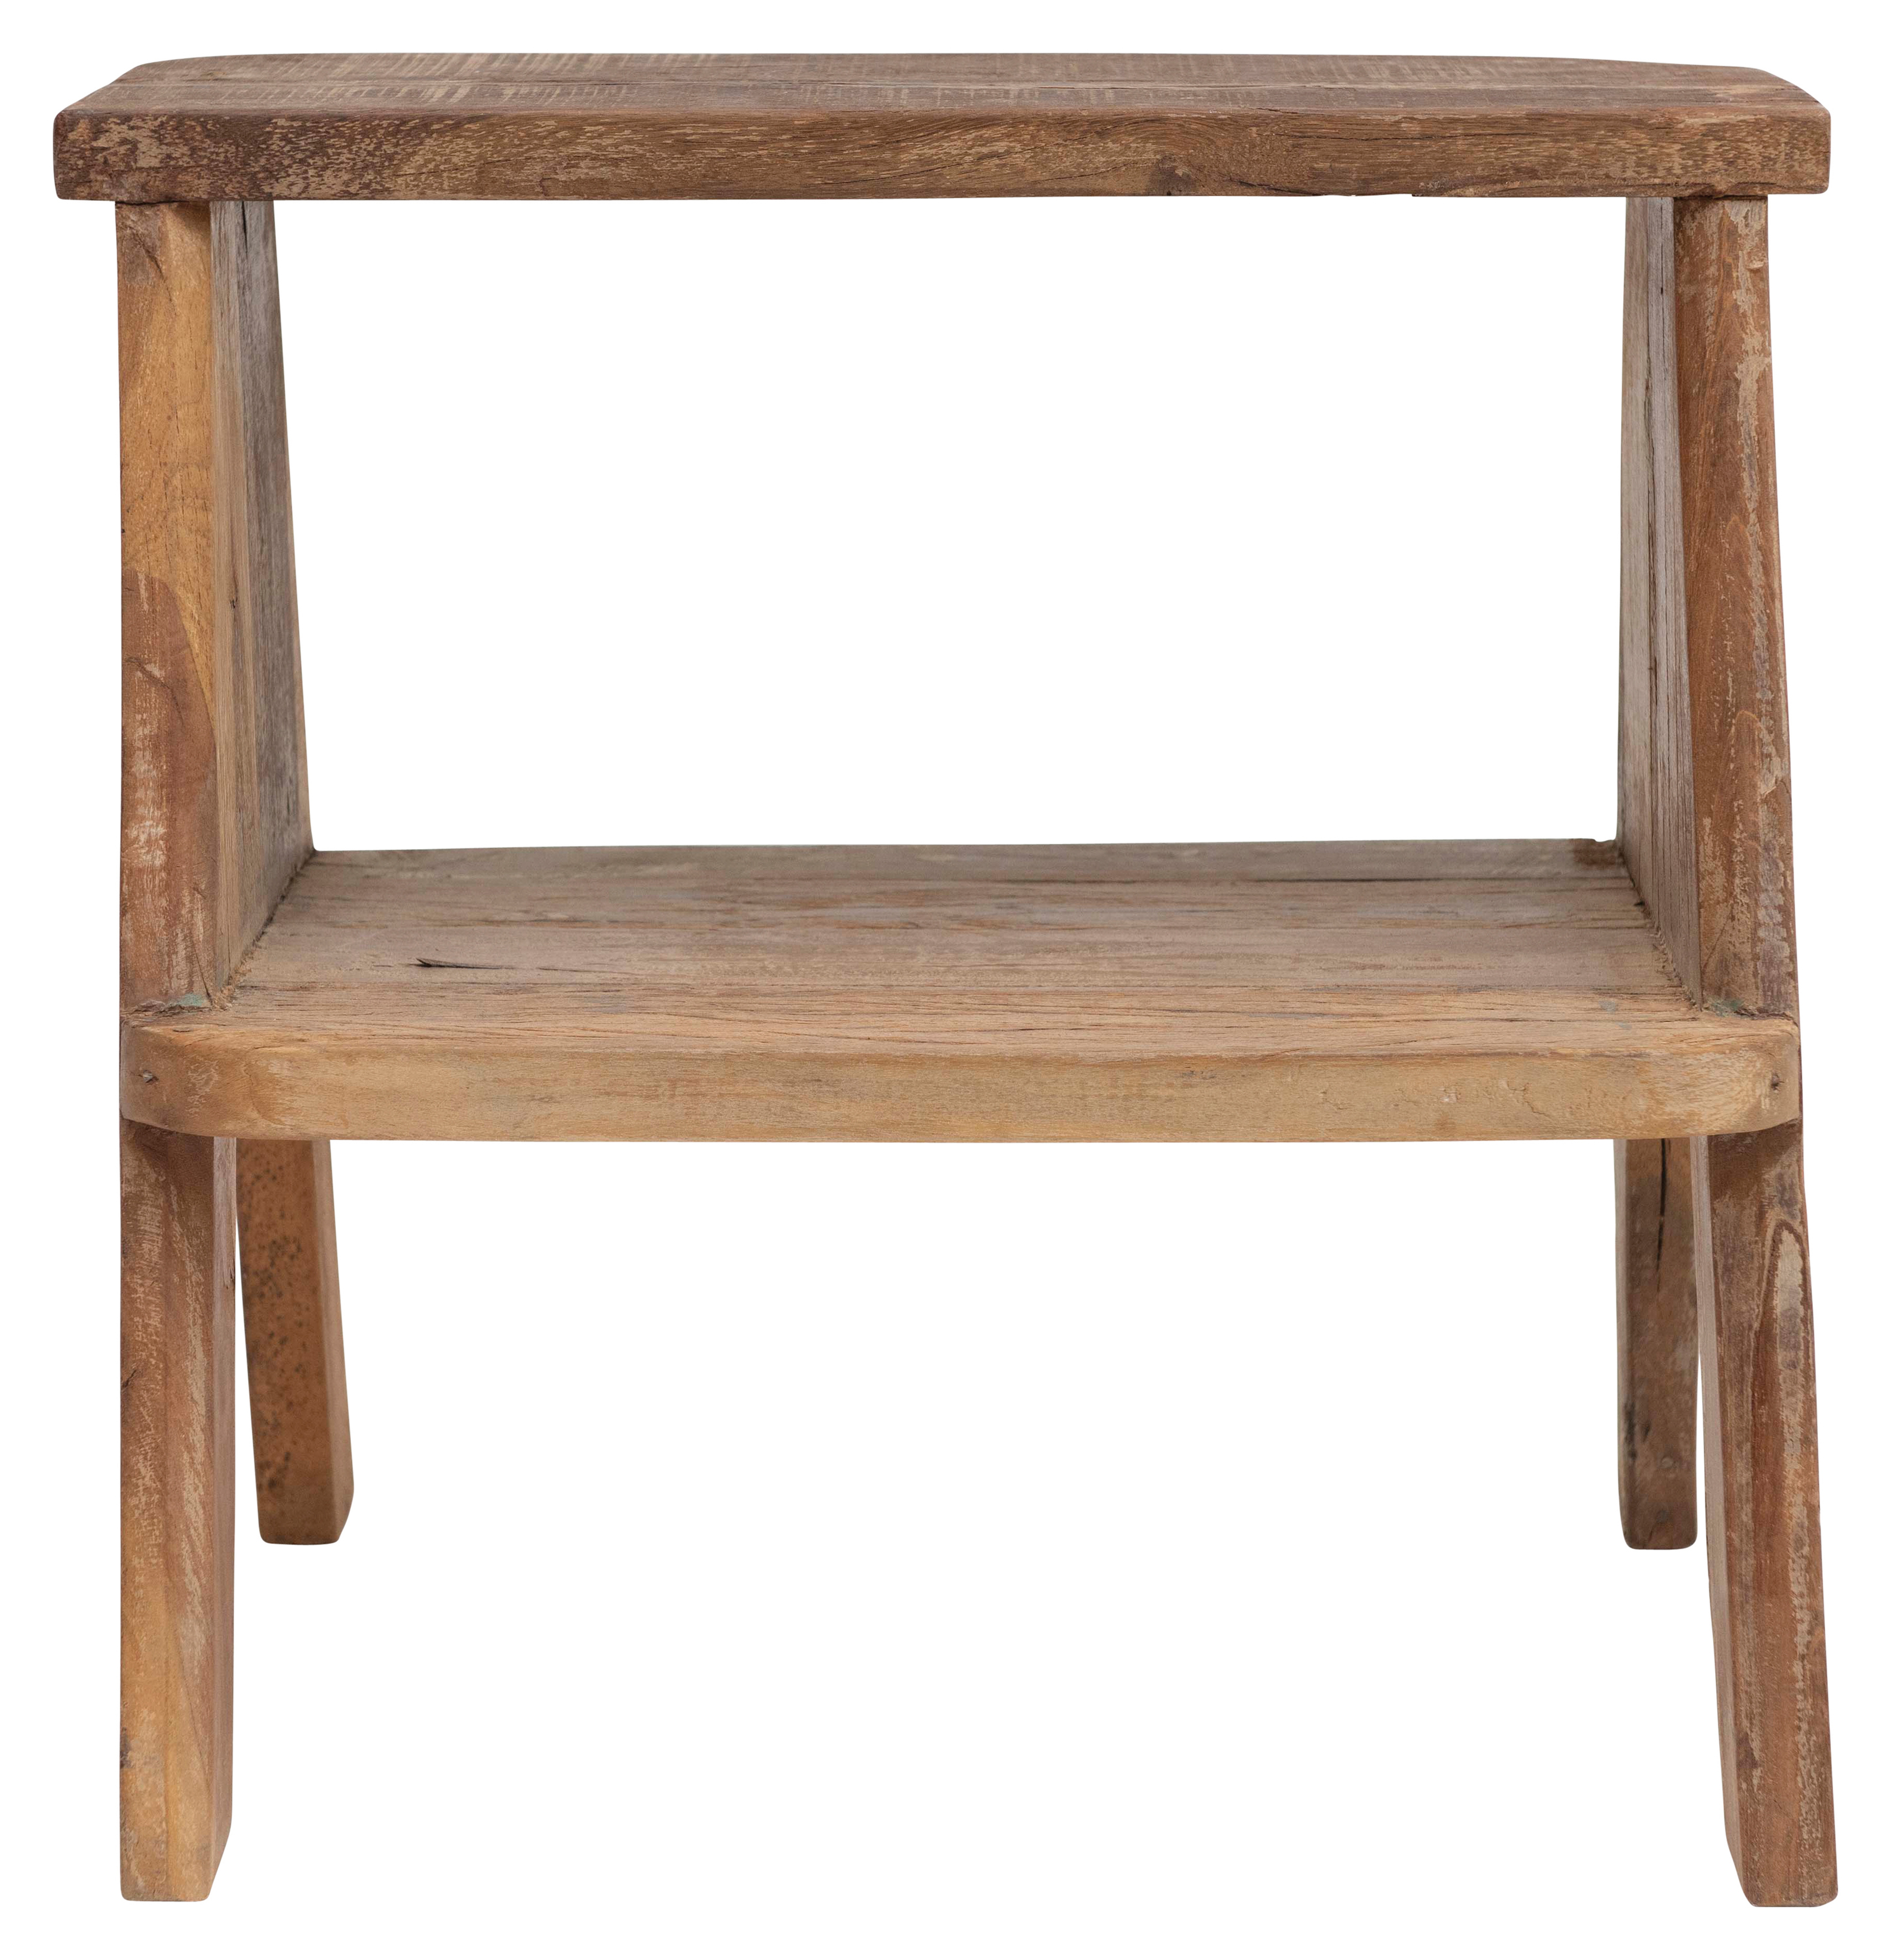 Reclaimed Wood Step Stool/Accent Table with Shelf - Nomad Home